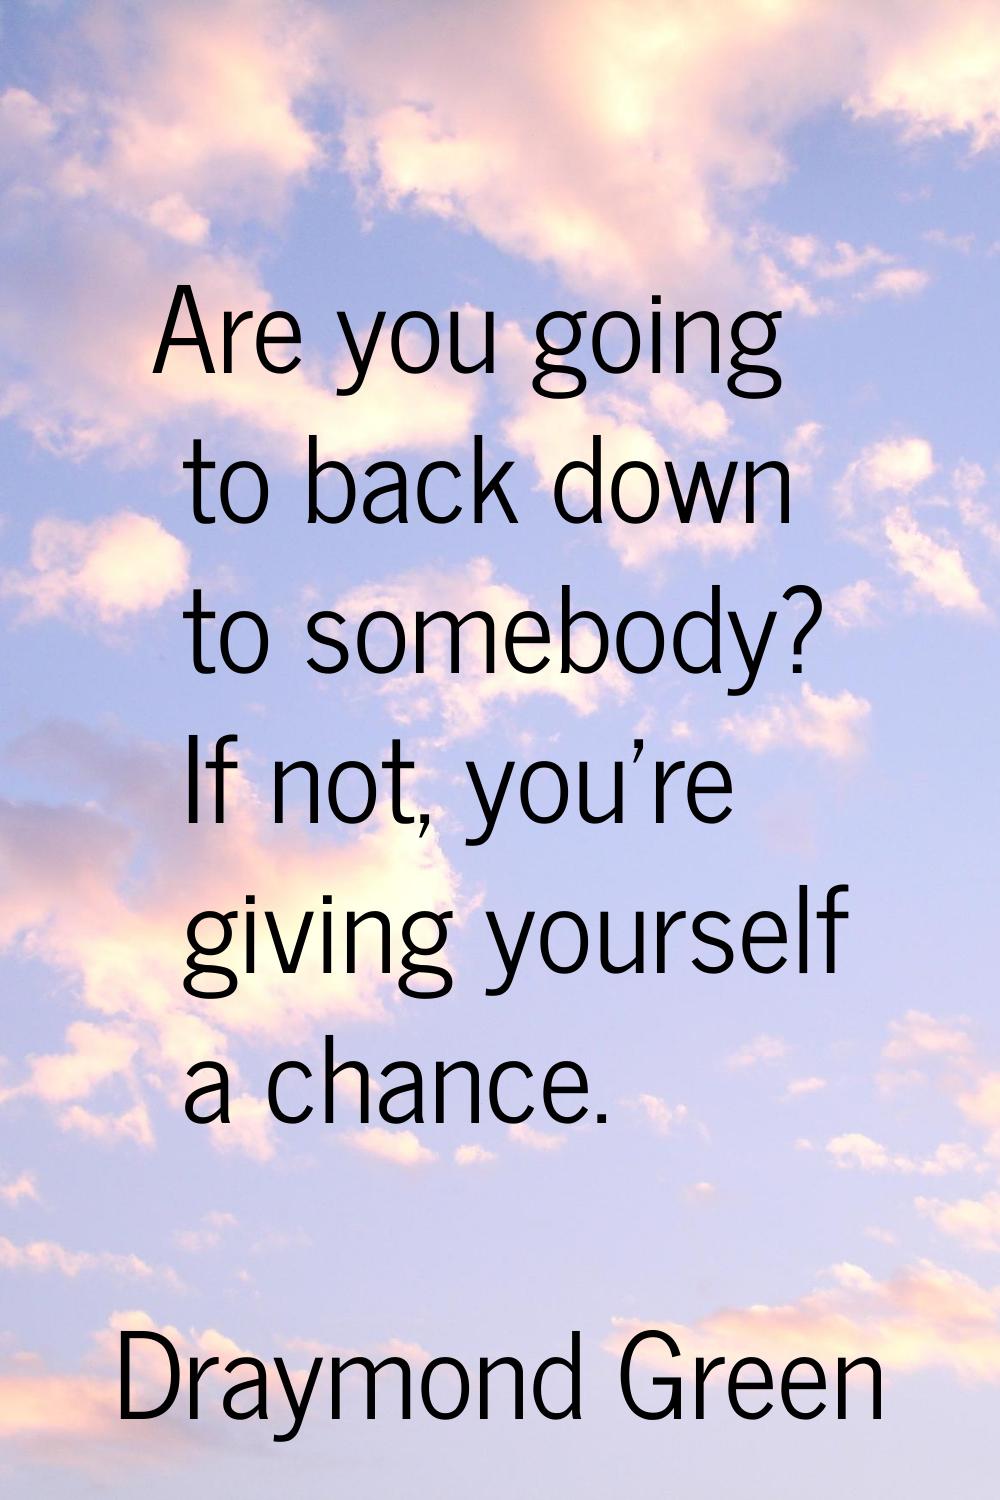 Are you going to back down to somebody? If not, you're giving yourself a chance.